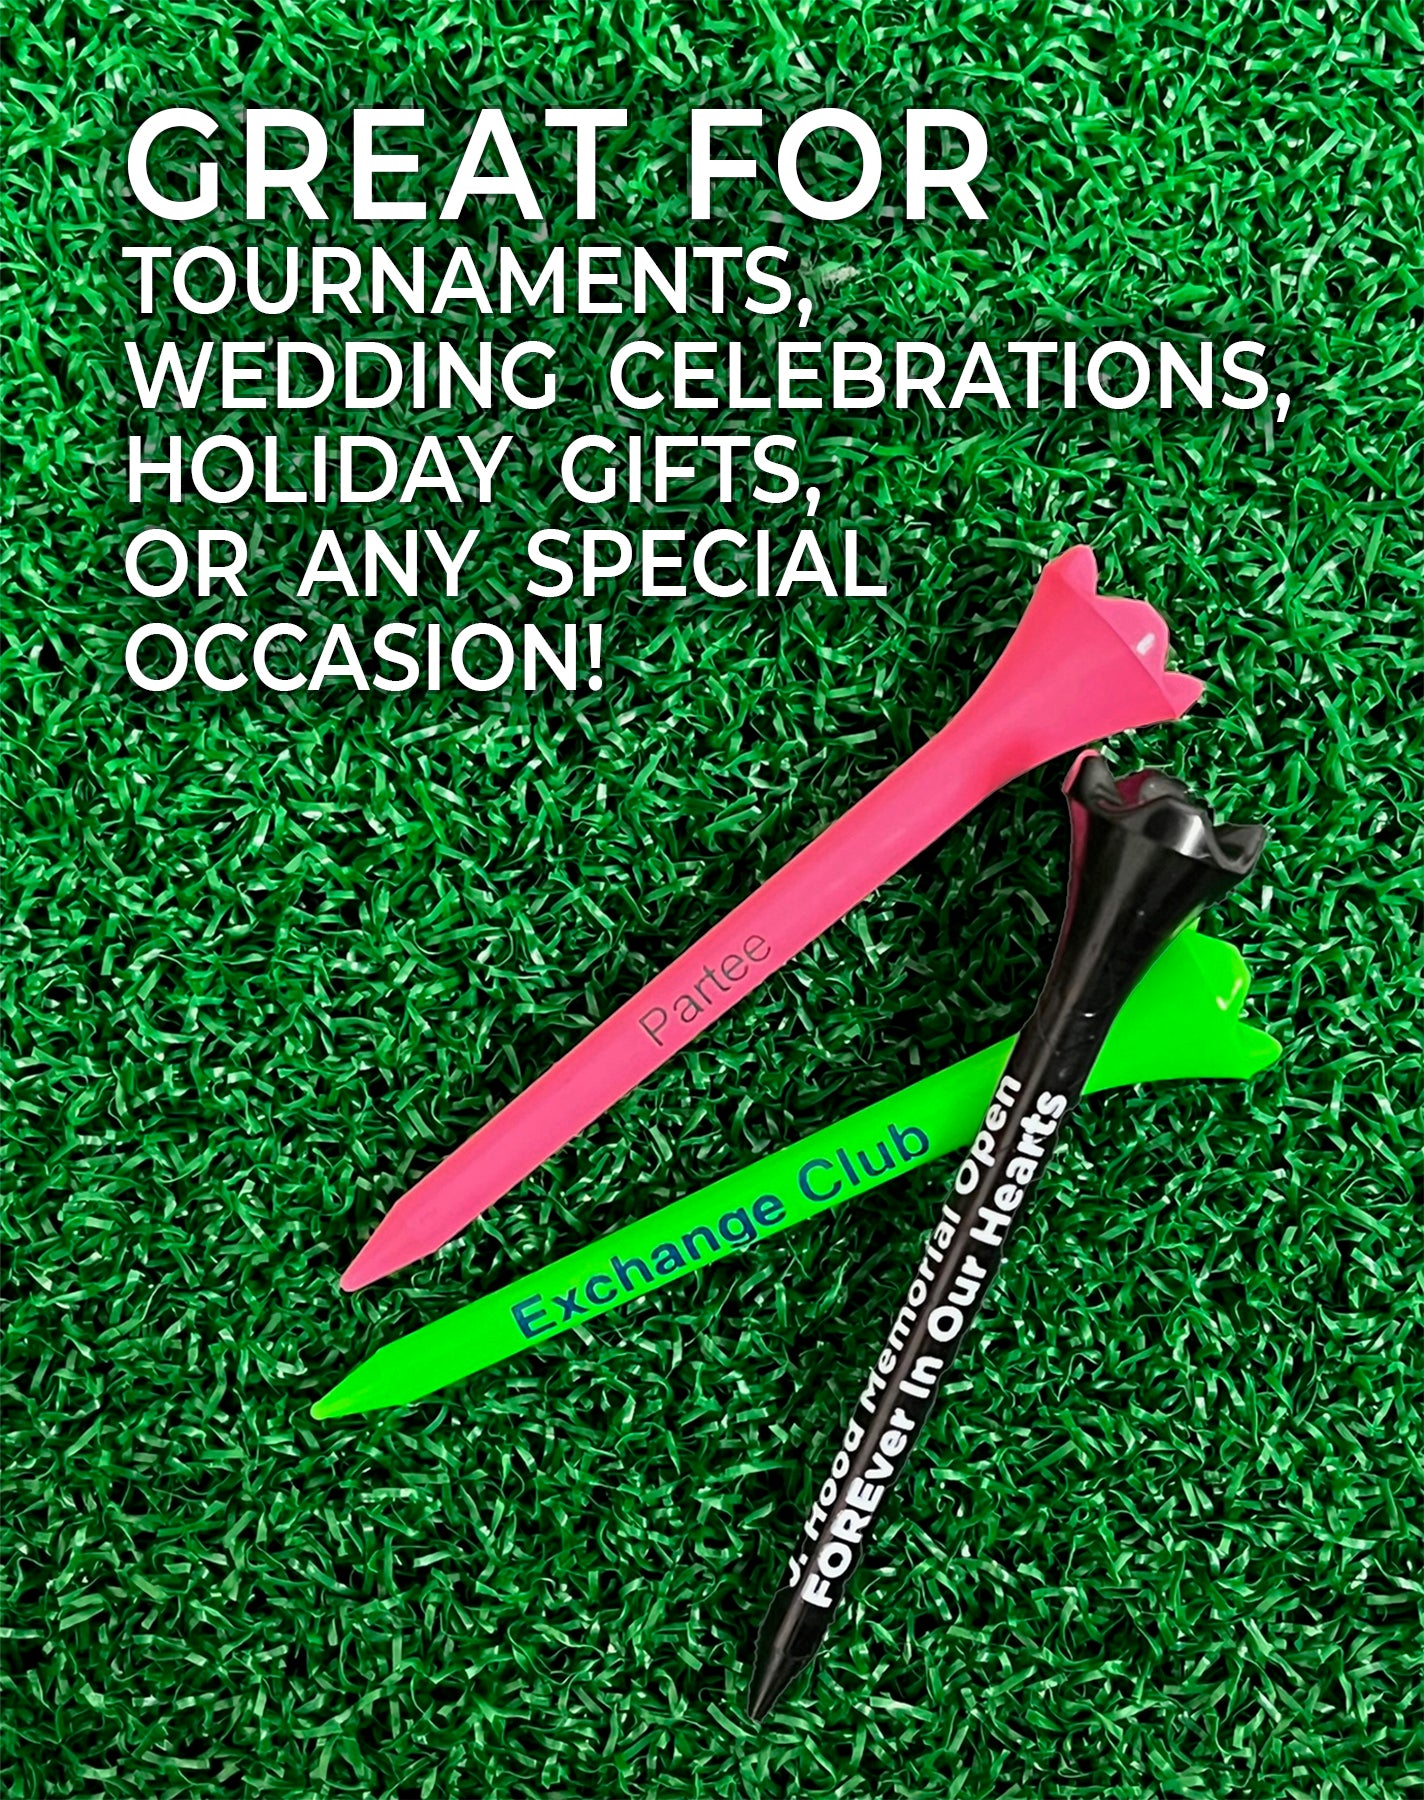 Personalized Combo Packs - 10 Pride Performance® Golf Tees